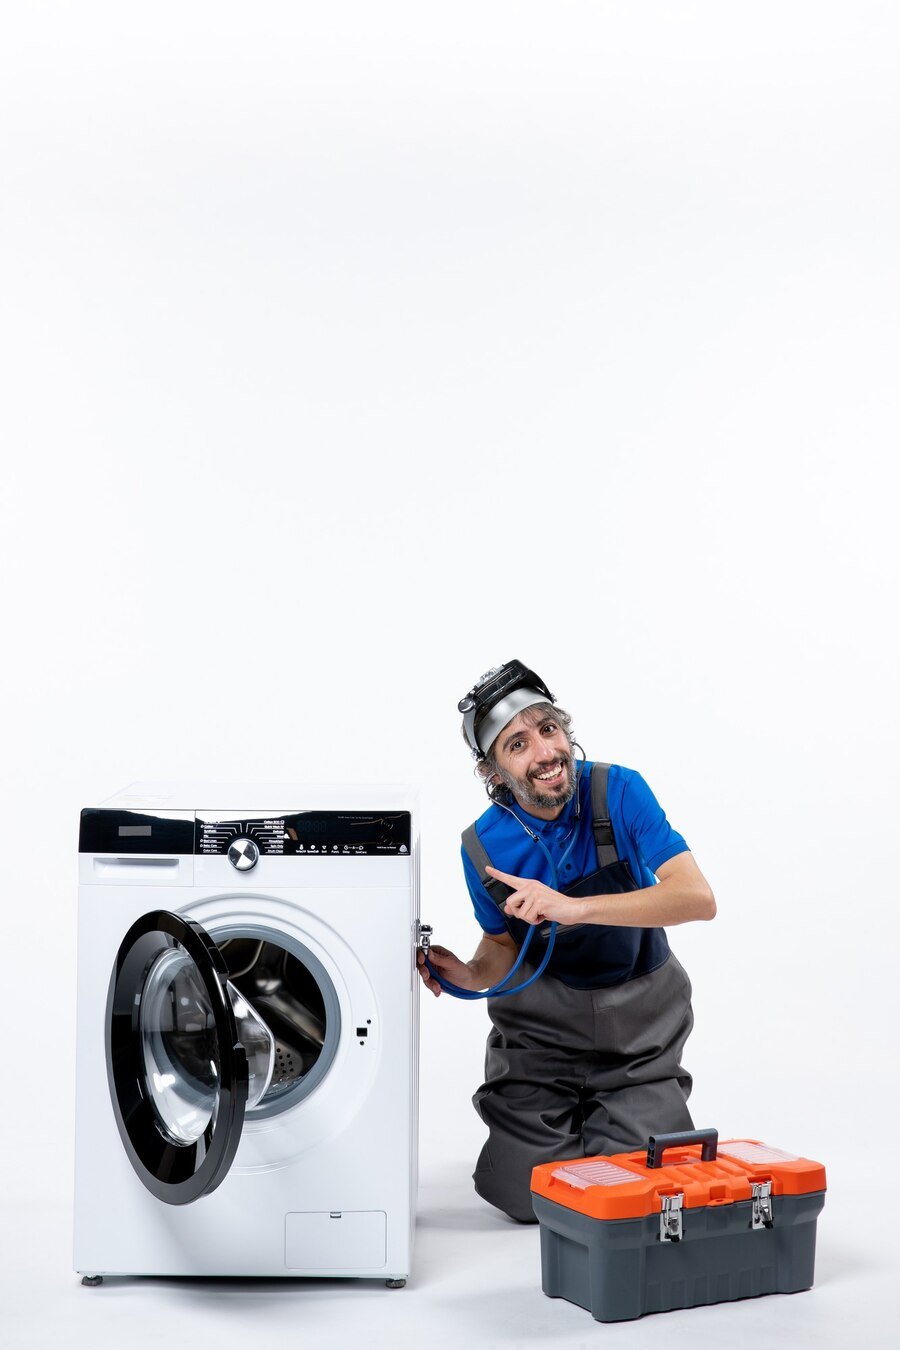 front-view-young-repairman-putting-stethoscope-washing-machine-sitting-near-washer-white-isolated-wall_140725-143626